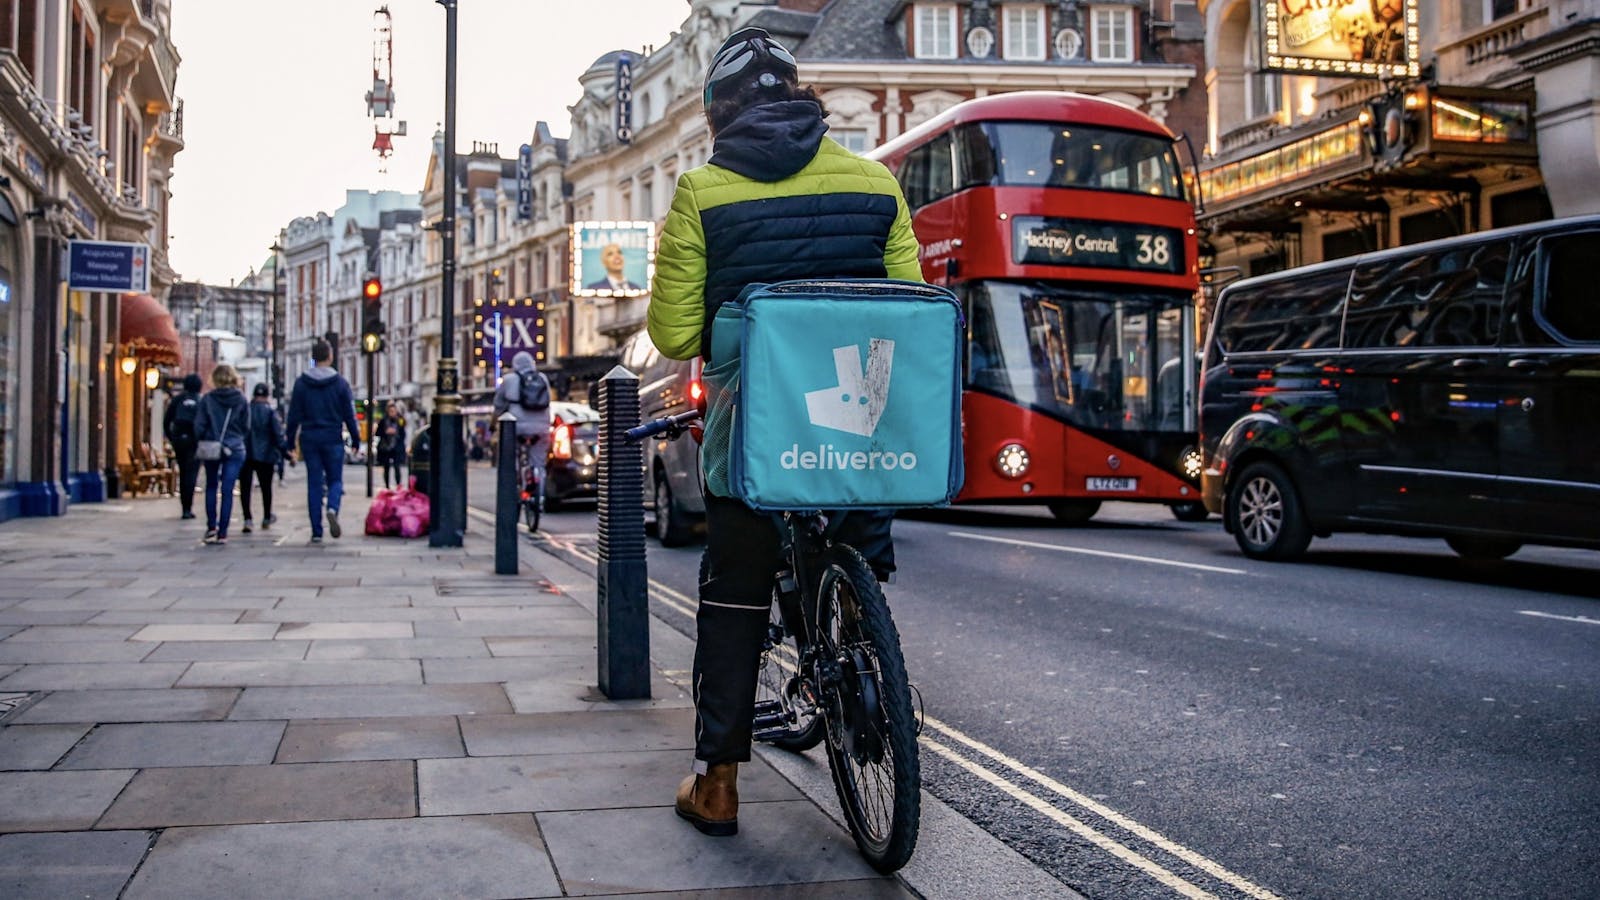 A Deliveroo courier in London last year. Photo by Bloomberg